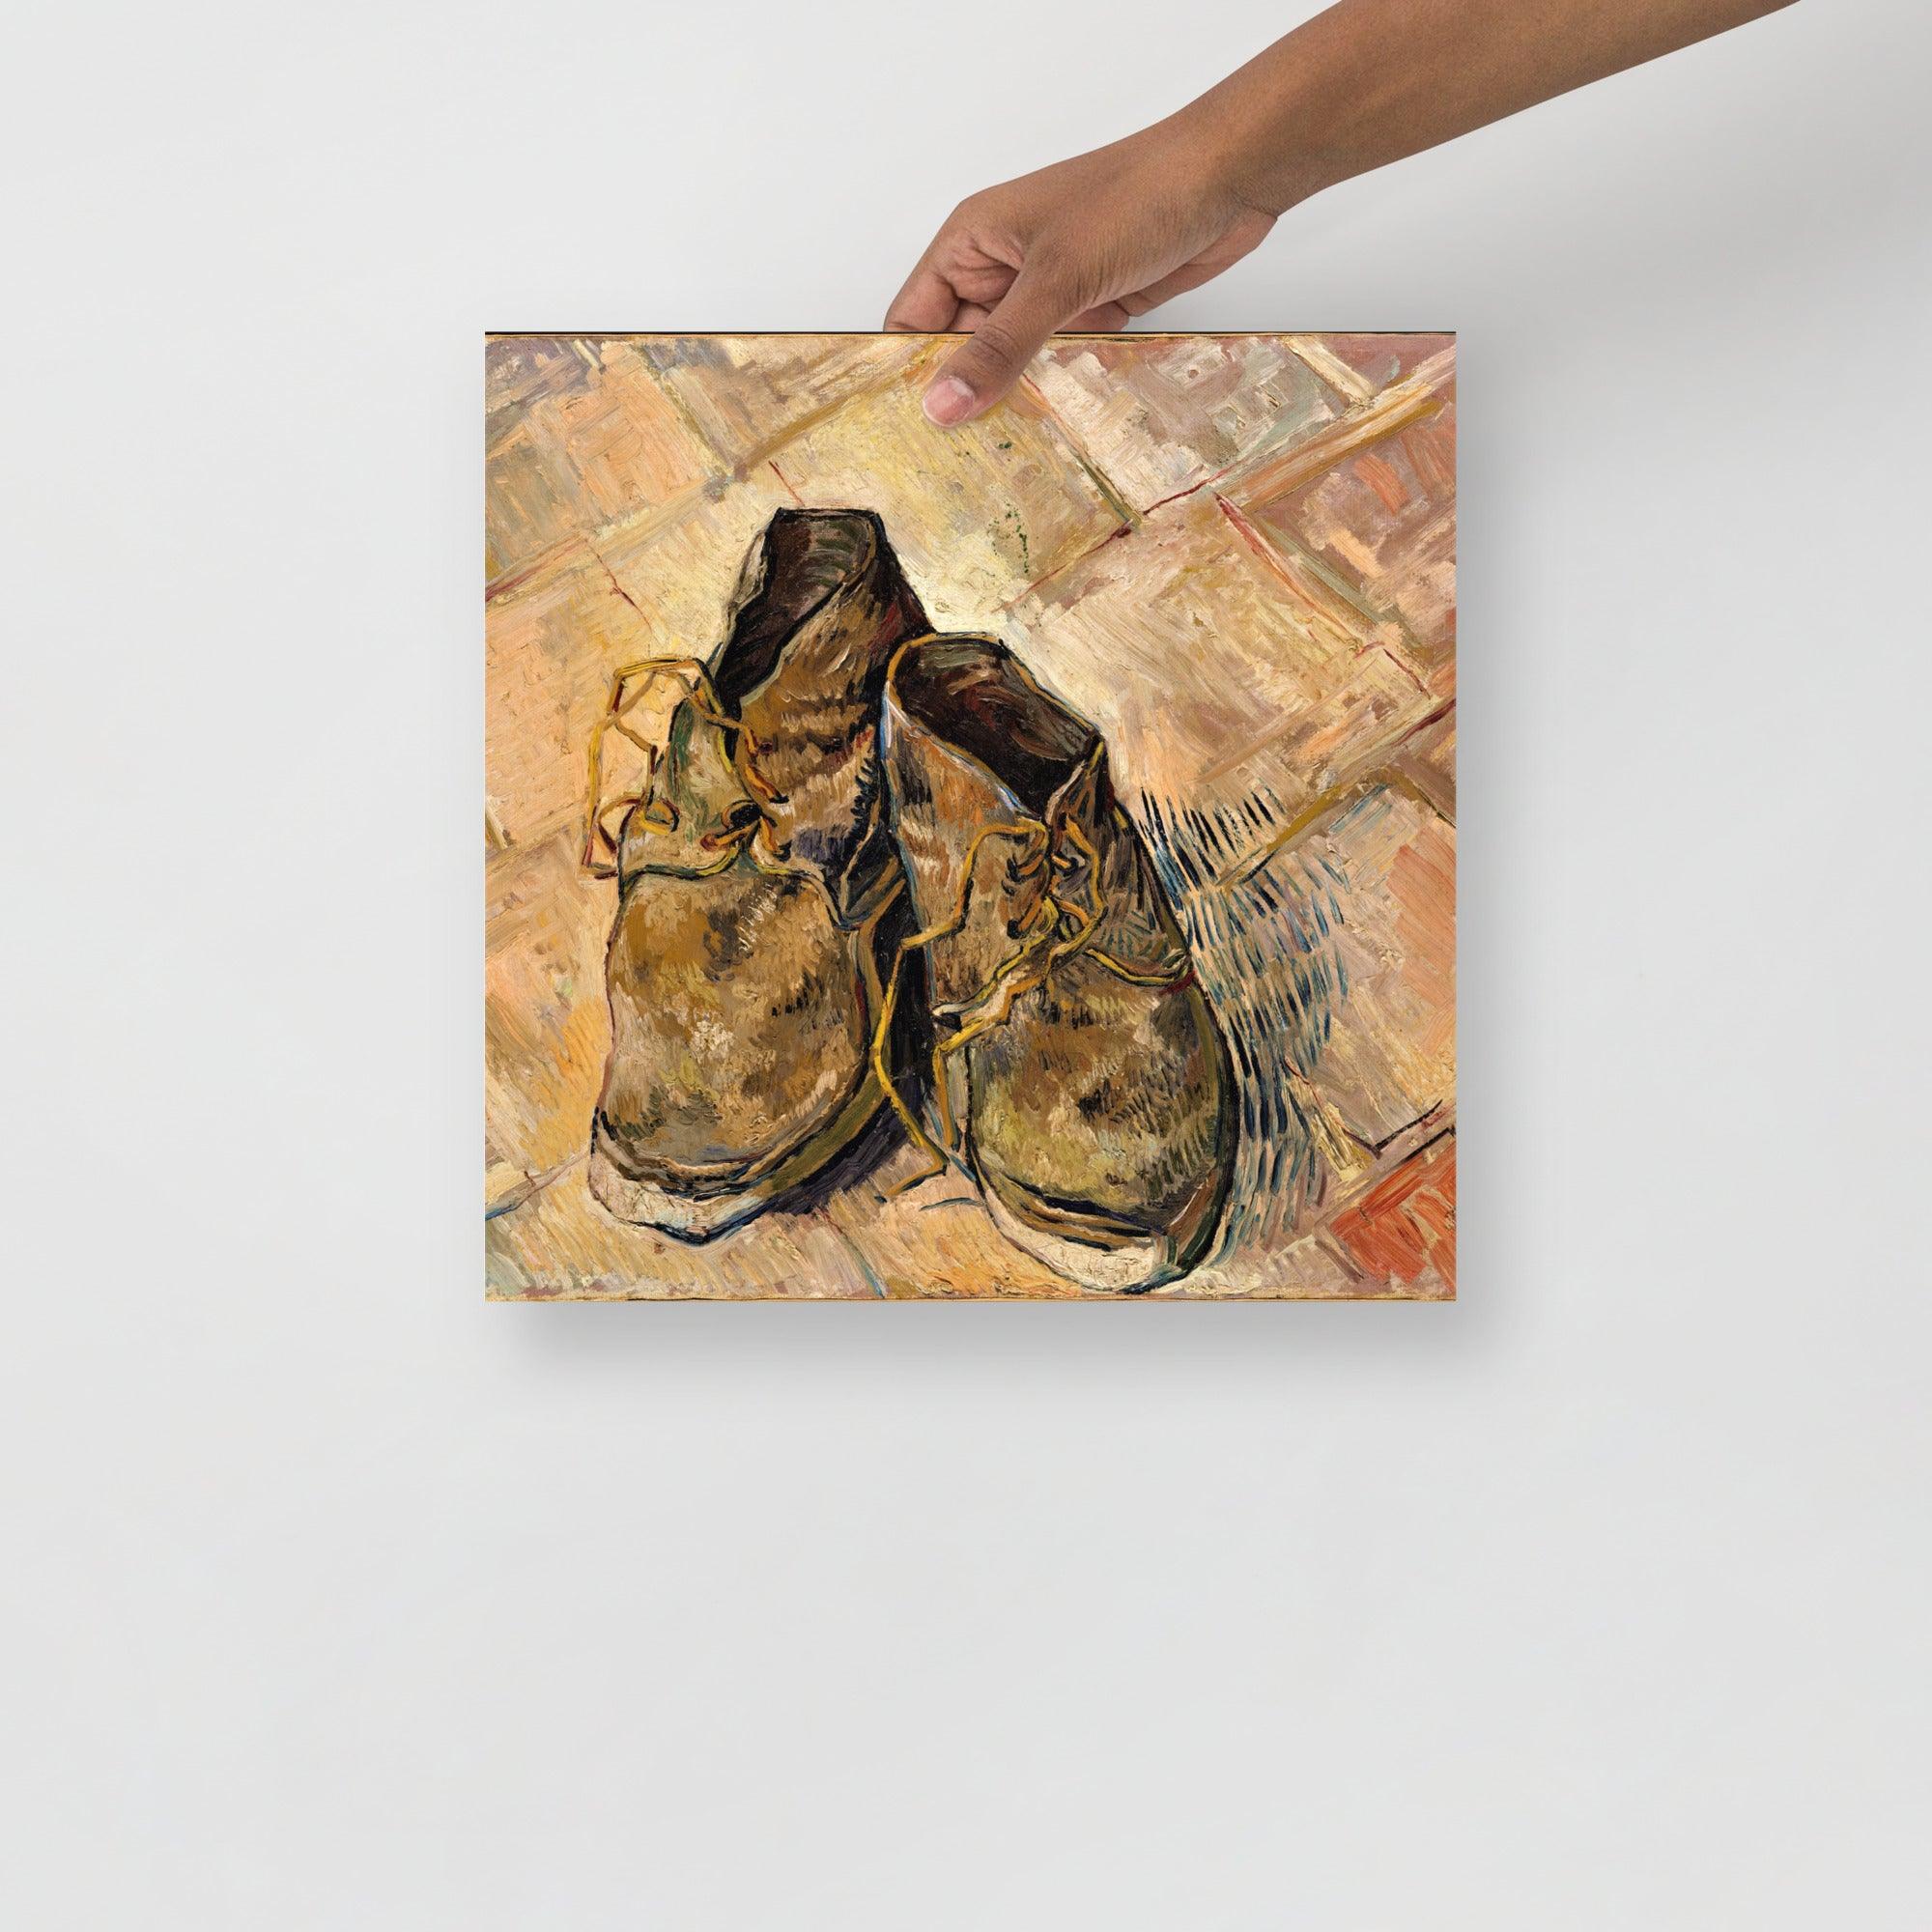 A Shoes by Vincent Van Gogh poster on a plain backdrop in size 14x14”.